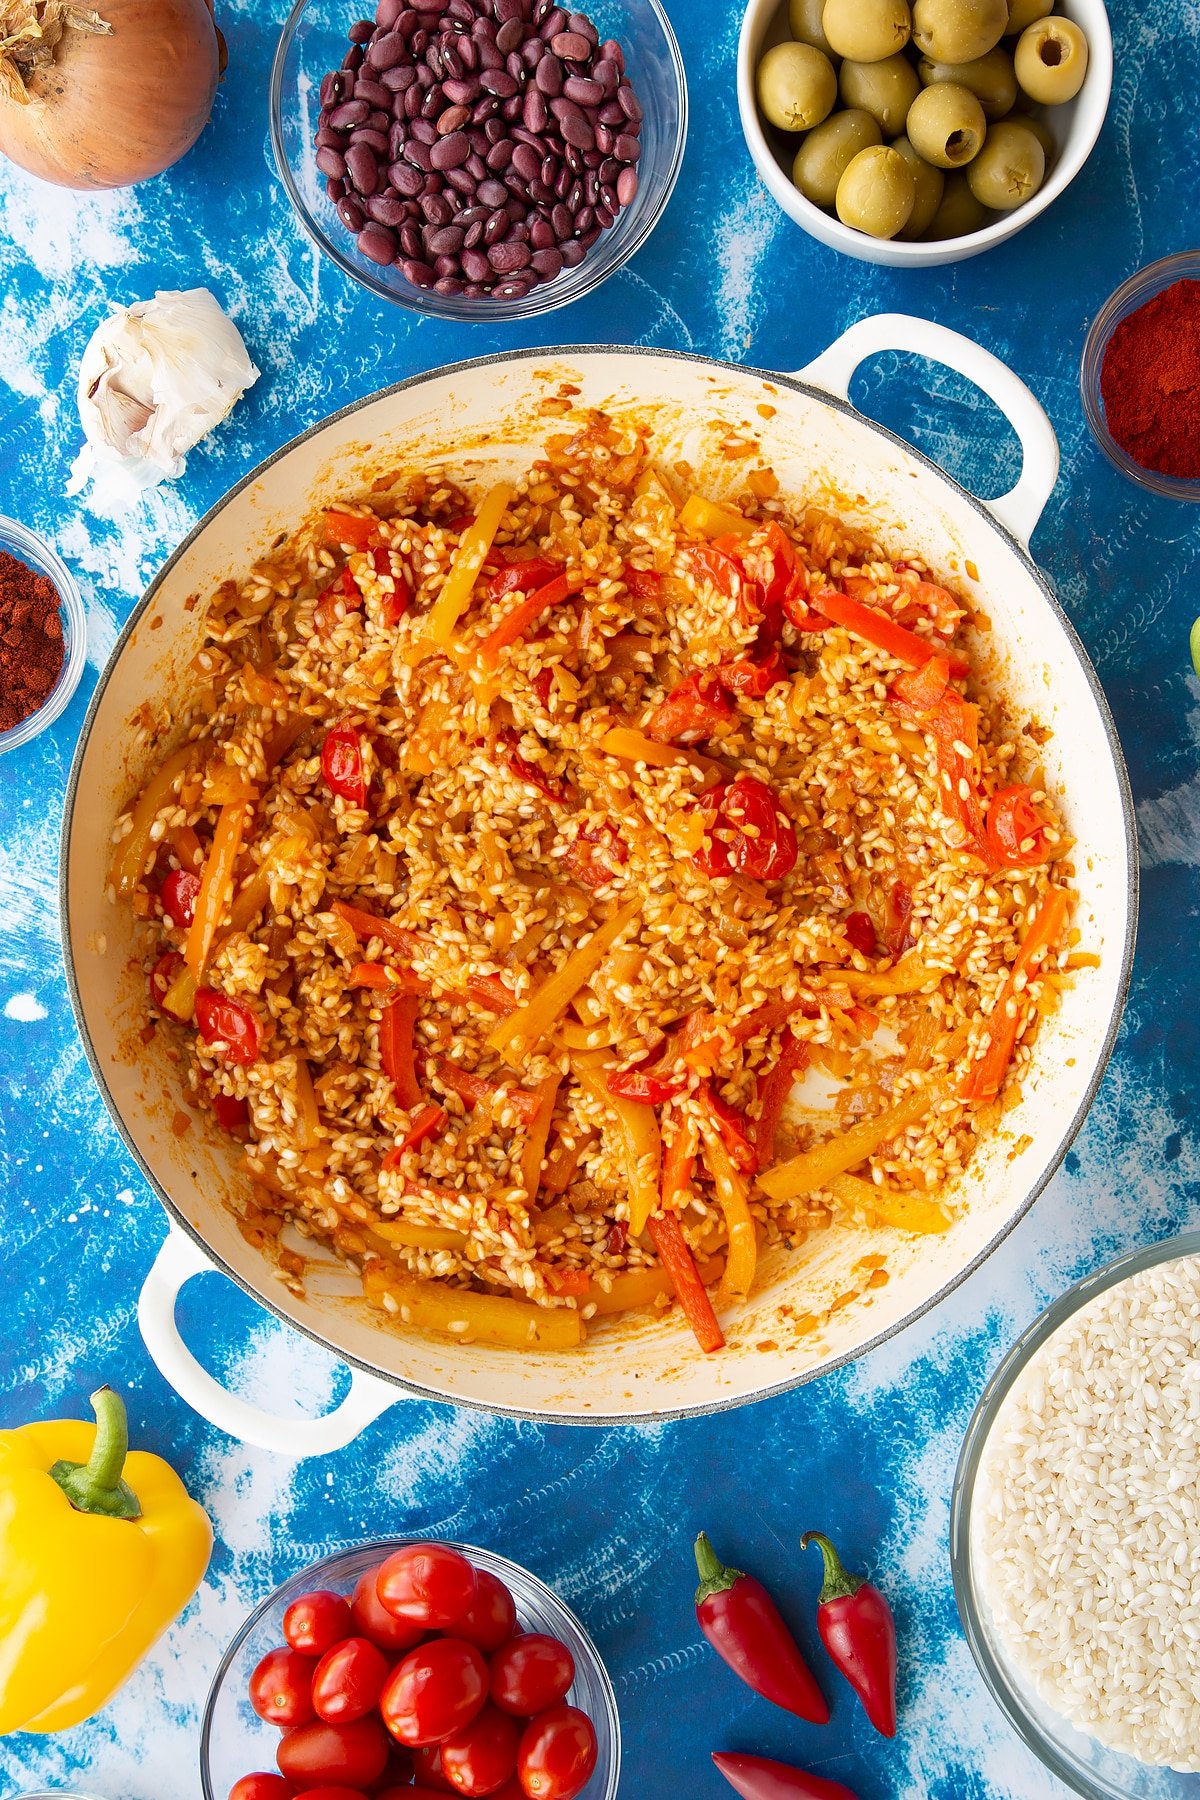 Sweated onions, spices, tomatoes and mixed sliced peppers in a pan with arborio rice mixed in. Ingredients to make easy Spanish rice and beans surround the pan.